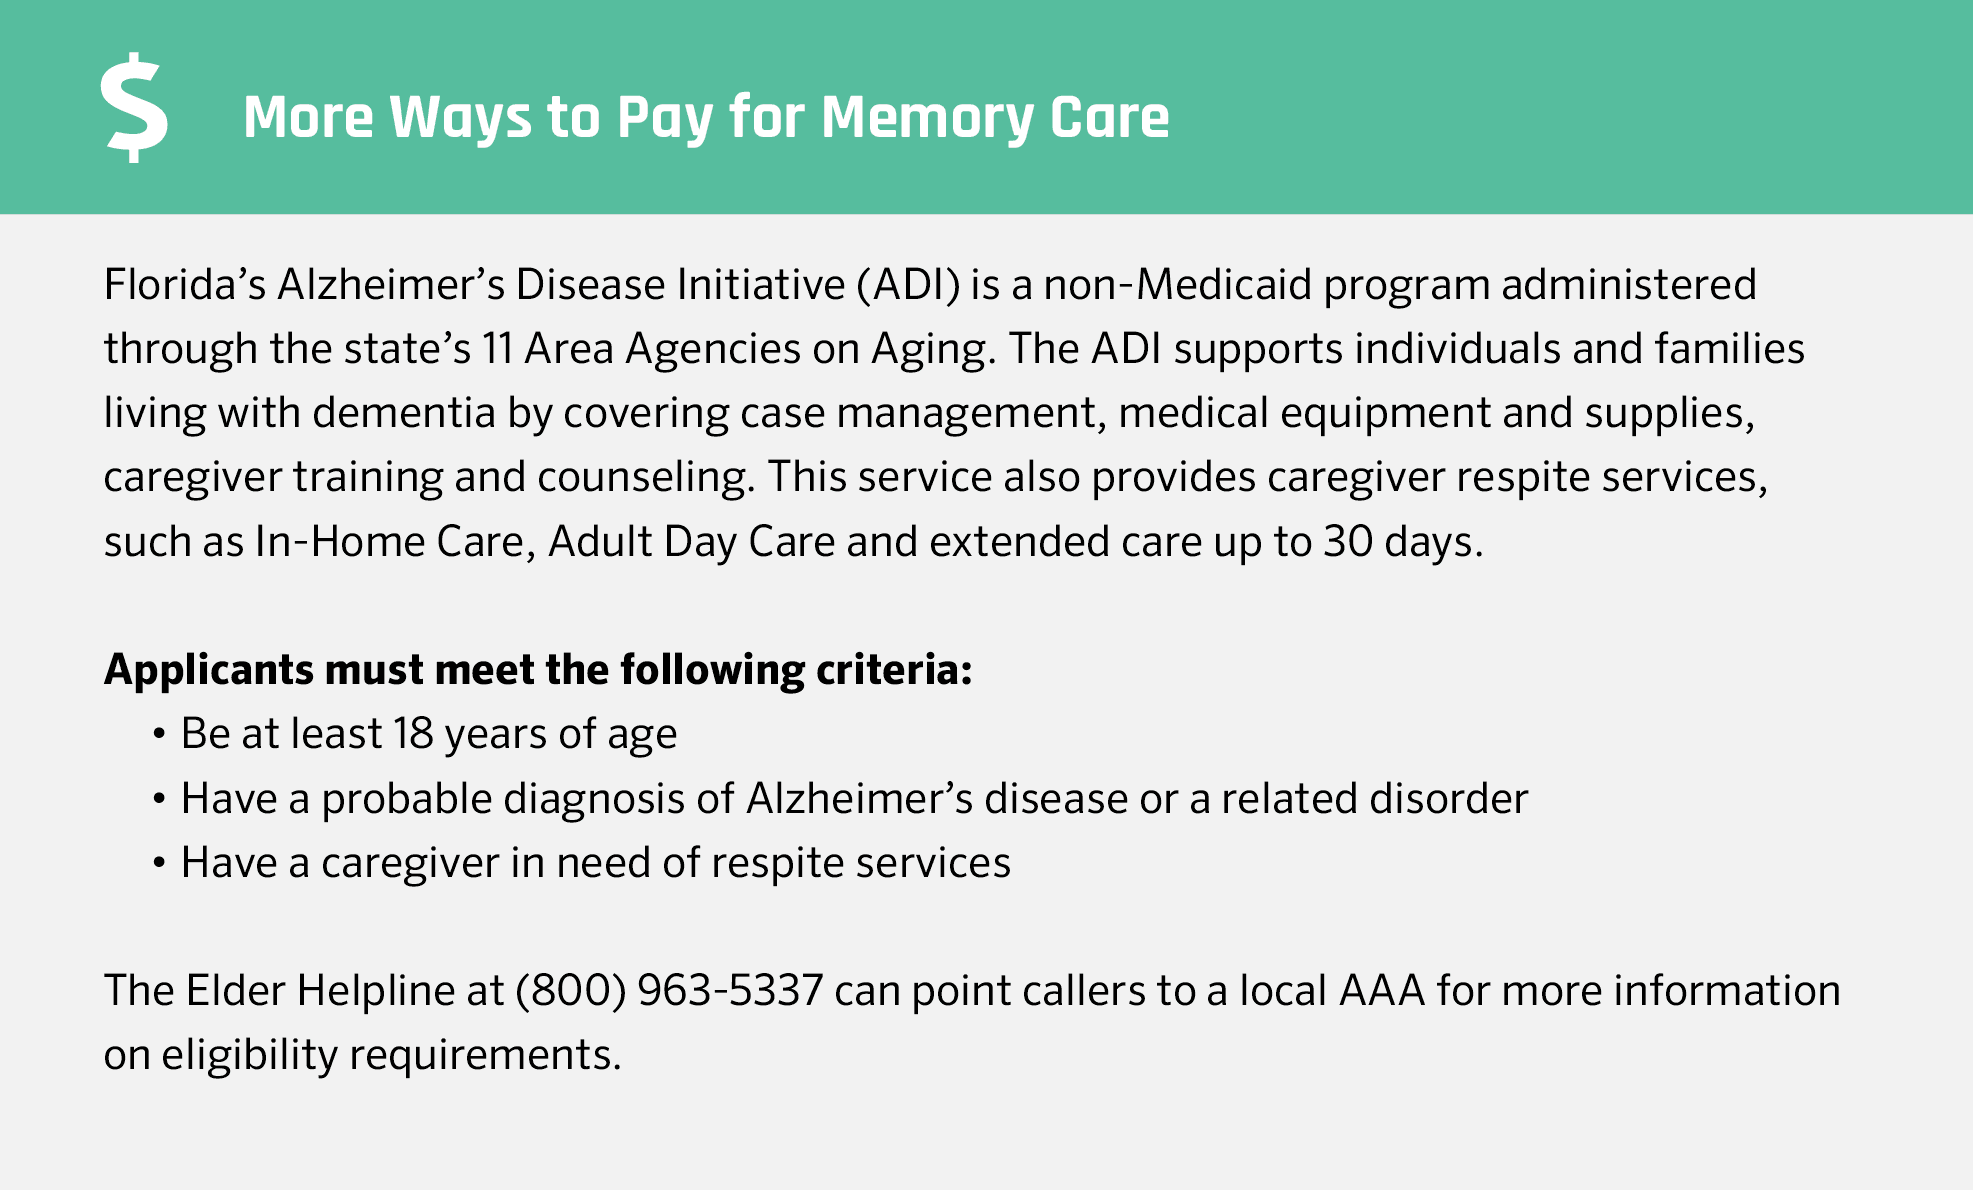 Financial Assistance for Memory Care in Florida